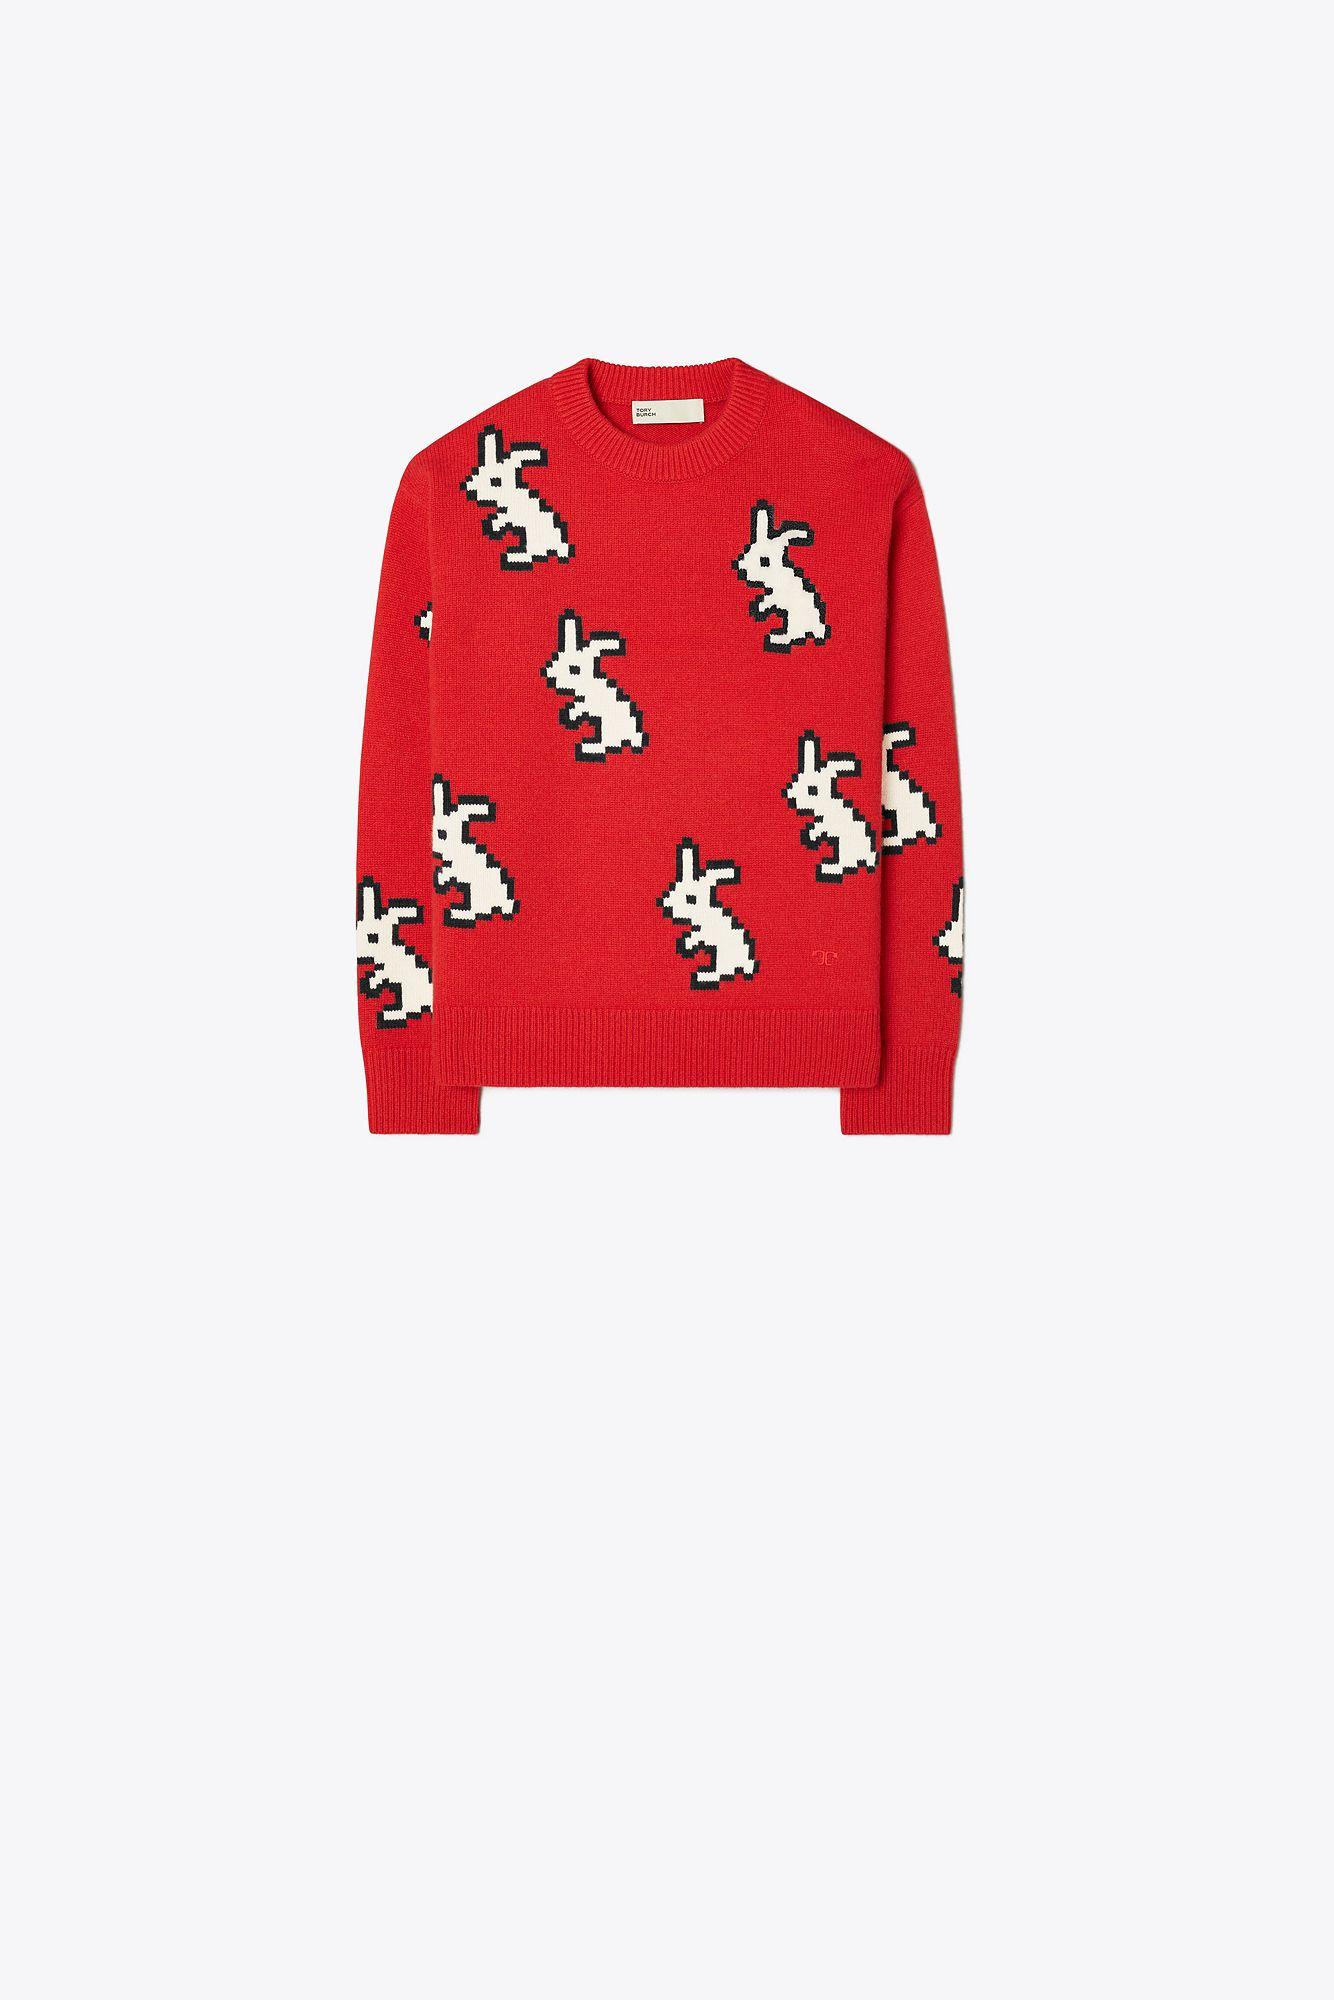 Tory Burch Cashmere Rabbit Sweater in Red | Lyst